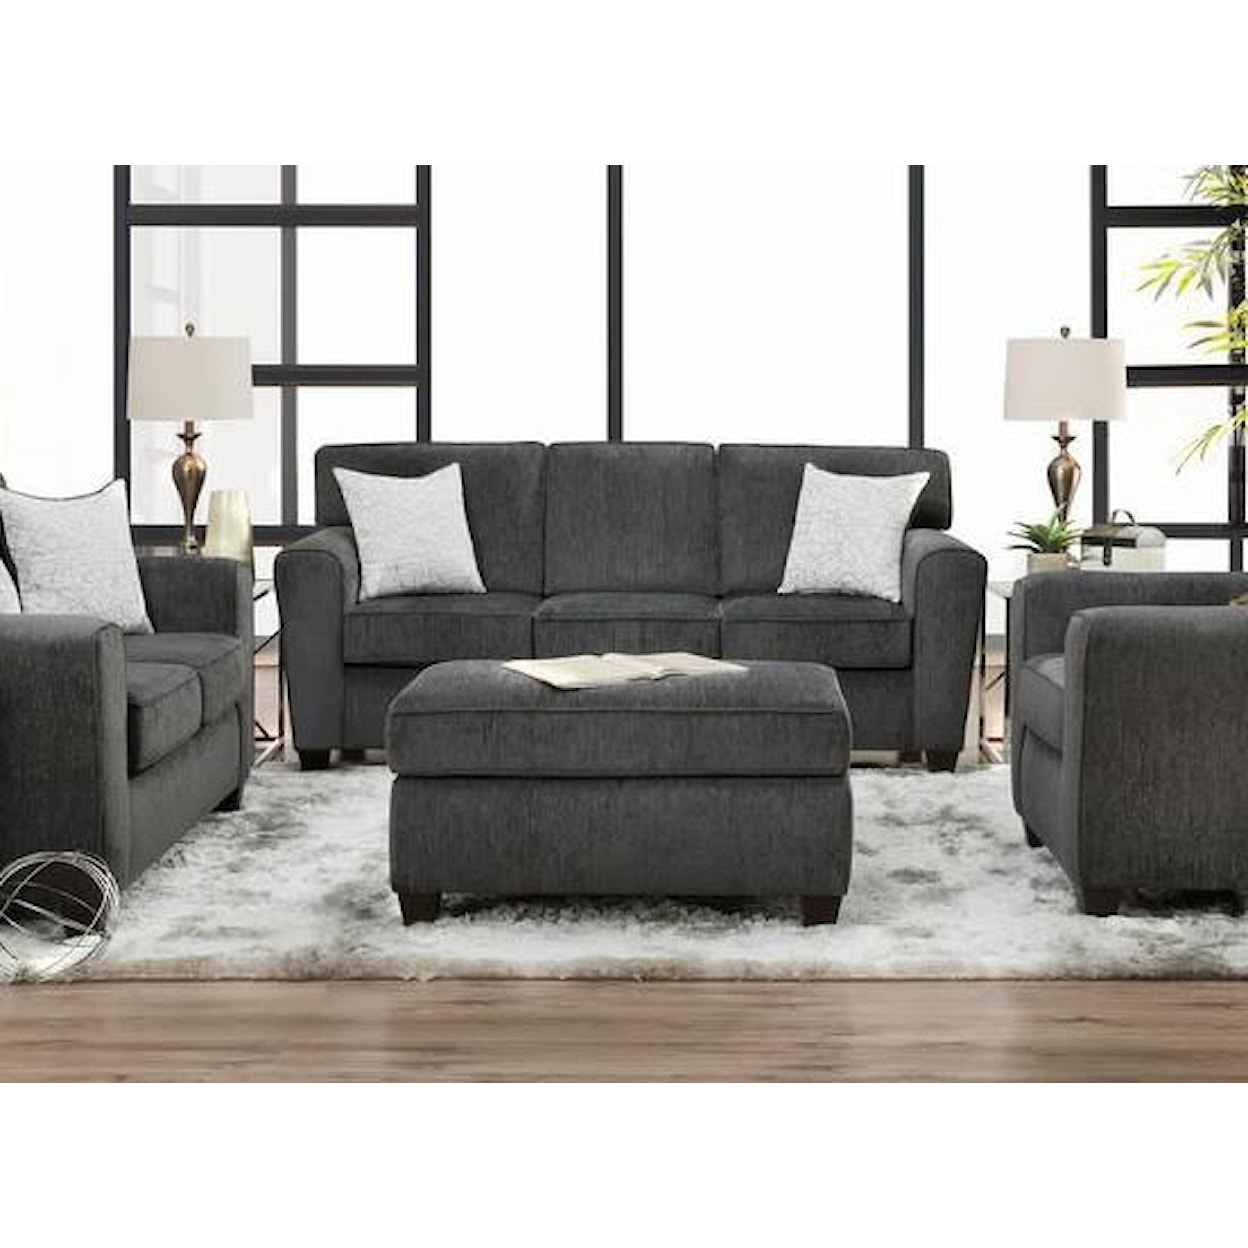 Peak Living 3100 Sofa with Casual Style